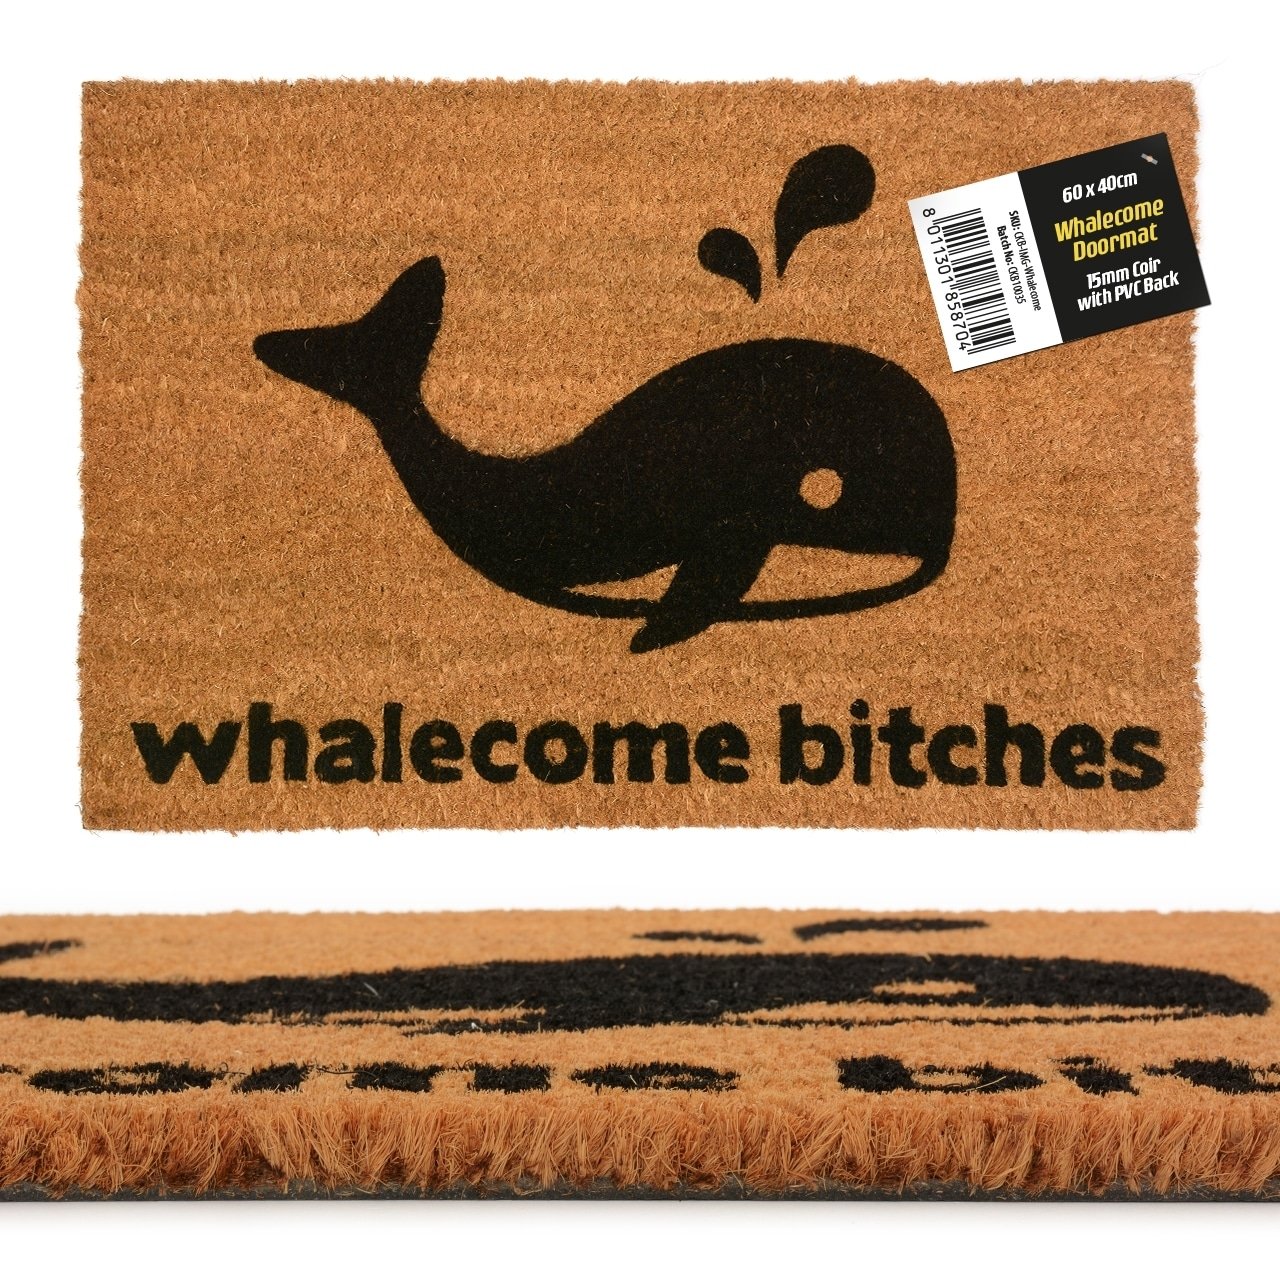 Whalecome Bitches Funny Coir Front Doormat